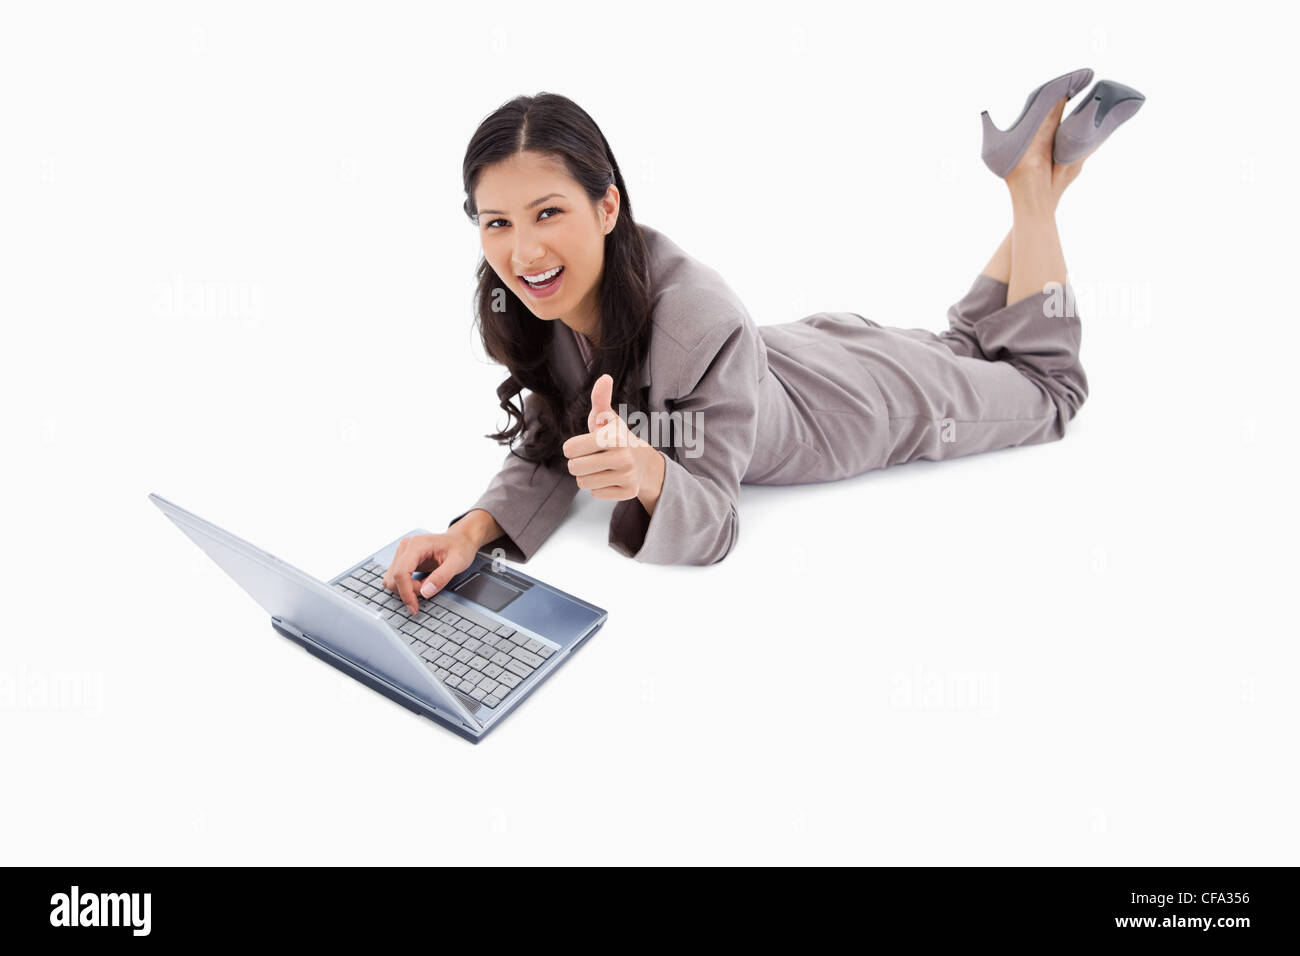 Lying woman with laptop giving thumb up Stock Photo